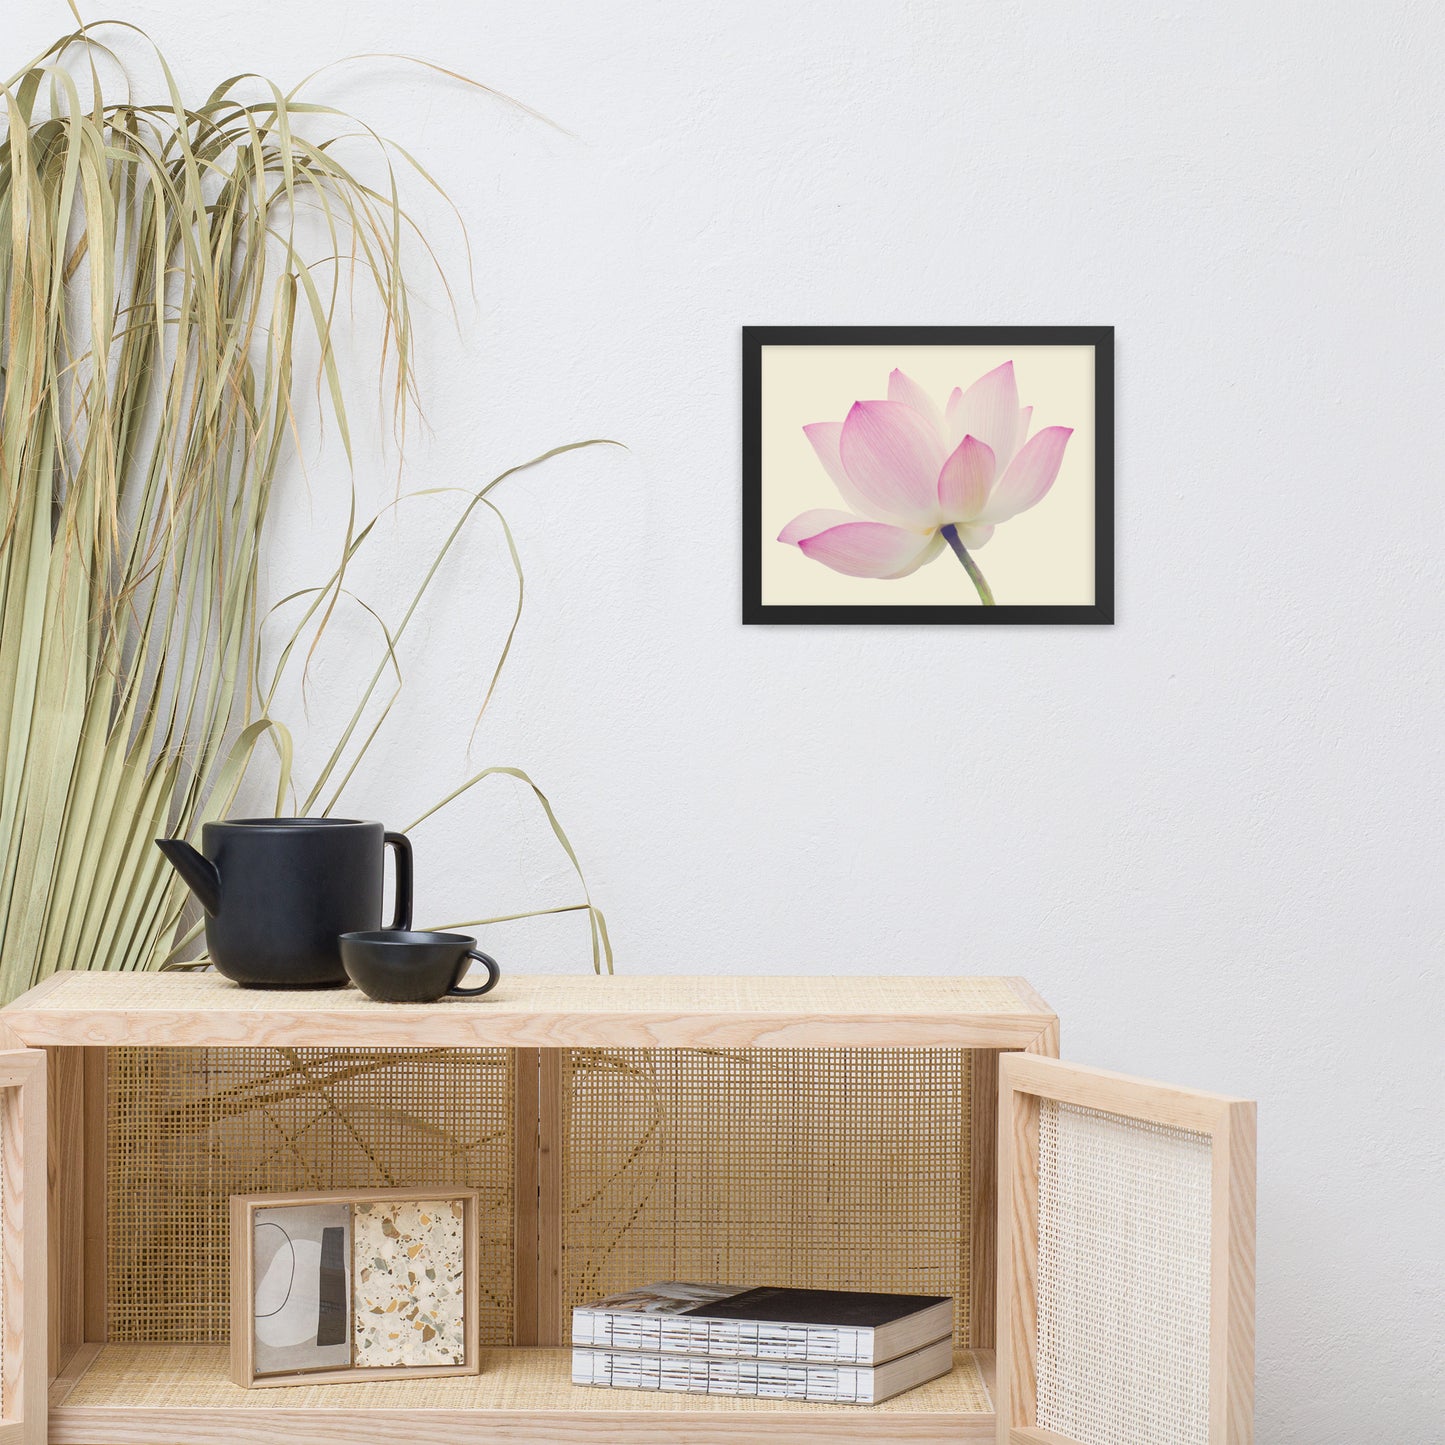 Lotus Flower Creamy Haze Effect Floral Nature Photo Framed Photo Paper Poster